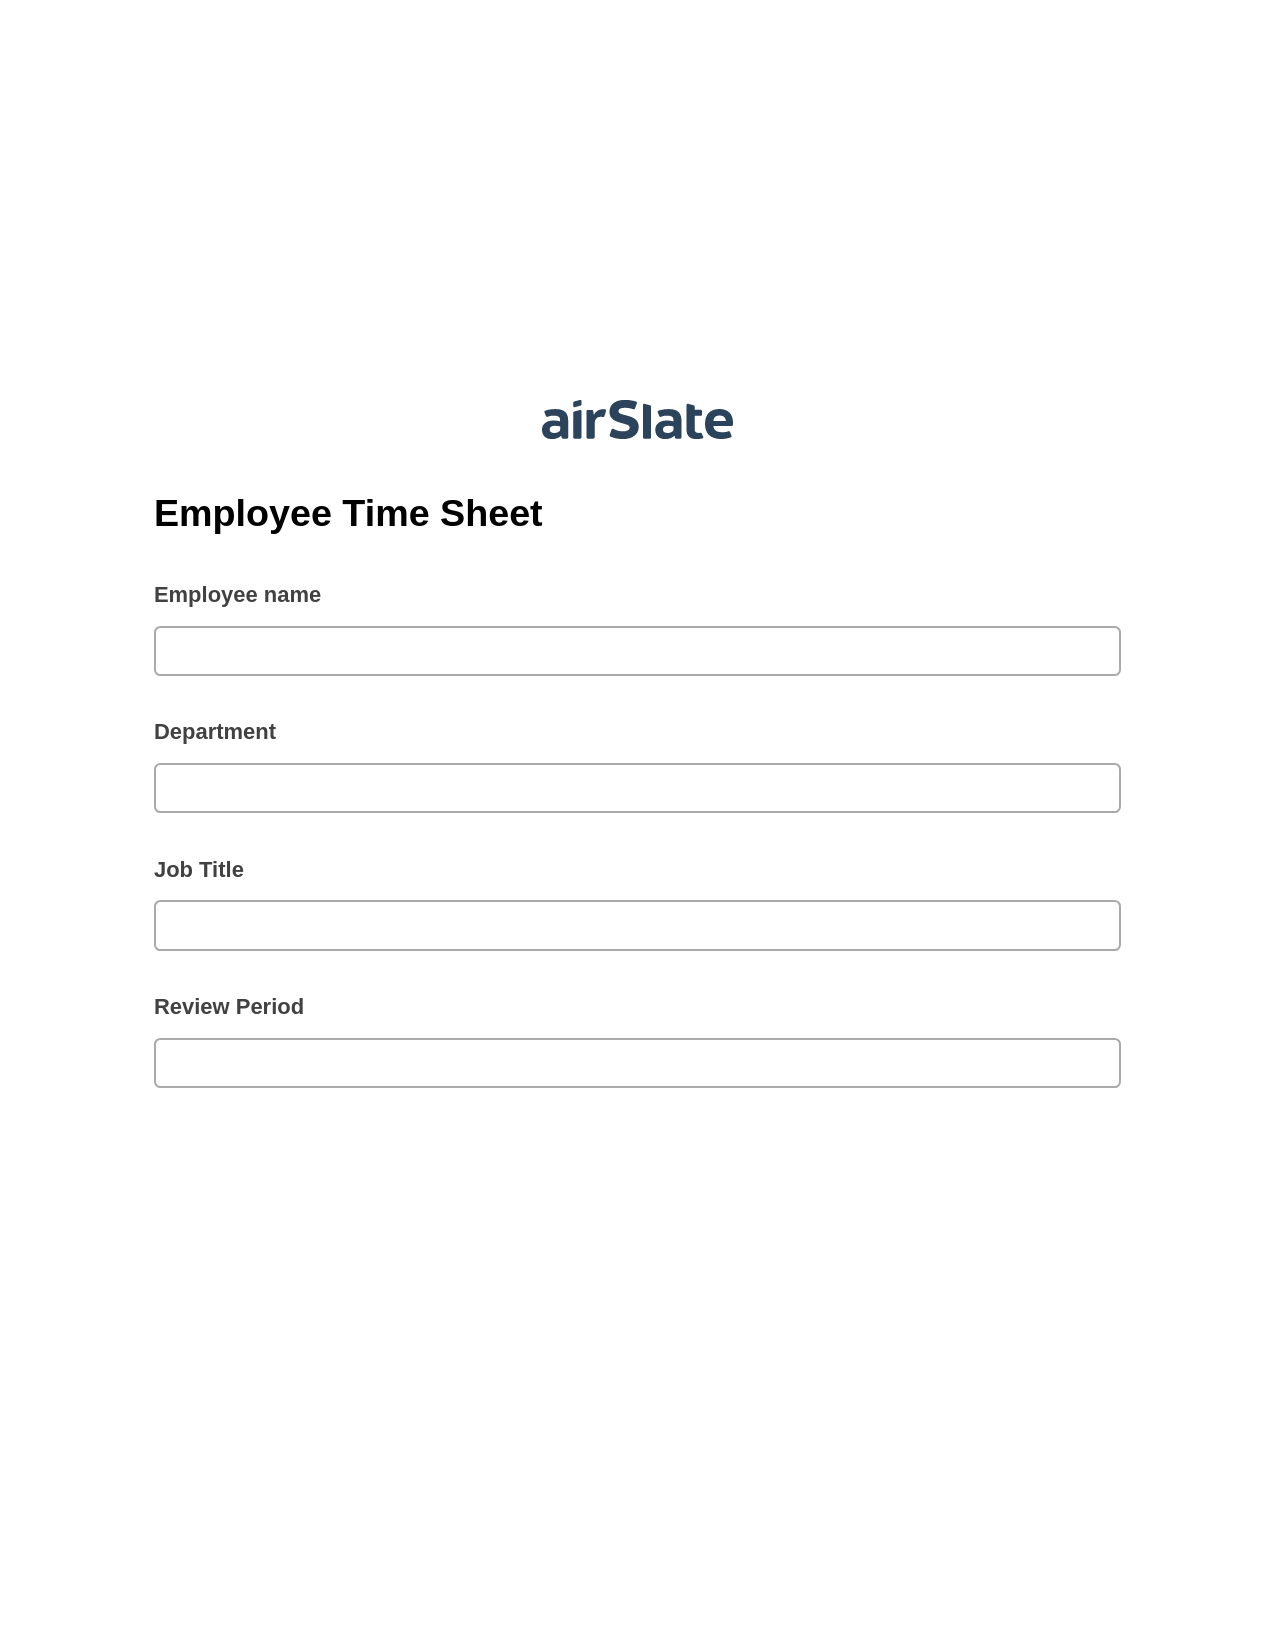 Employee Time Sheet Pre-fill from Salesforce Records Bot, Update Audit Trail Bot, Export to Google Sheet Bot